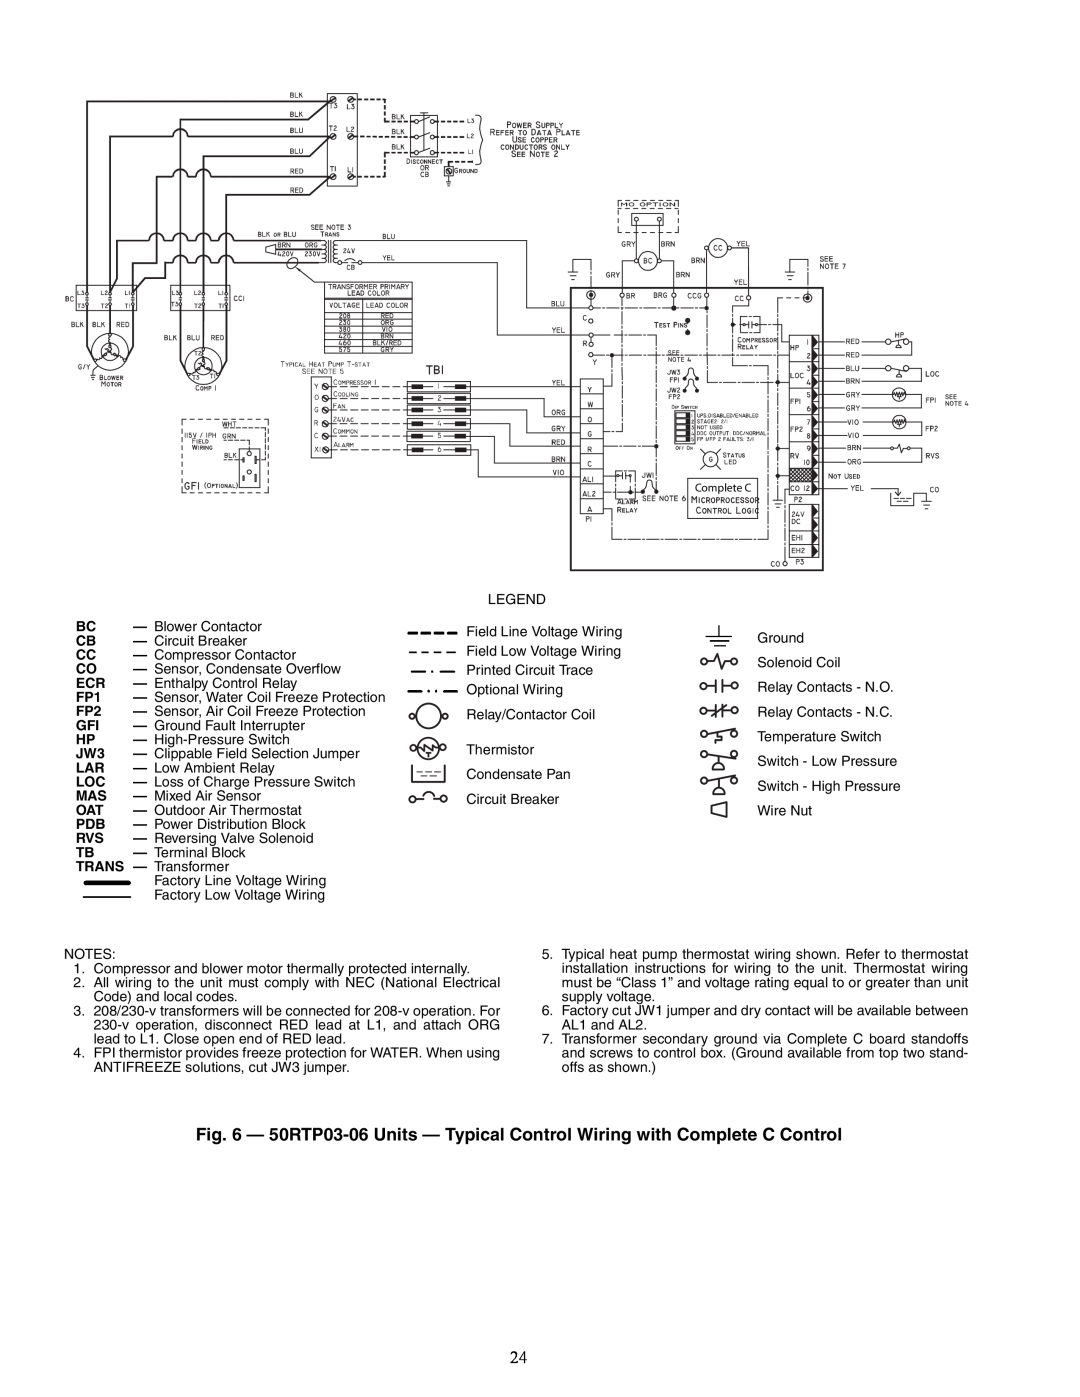 Carrier 50RTP03-20 specifications Circuit Breaker, a50-8553 